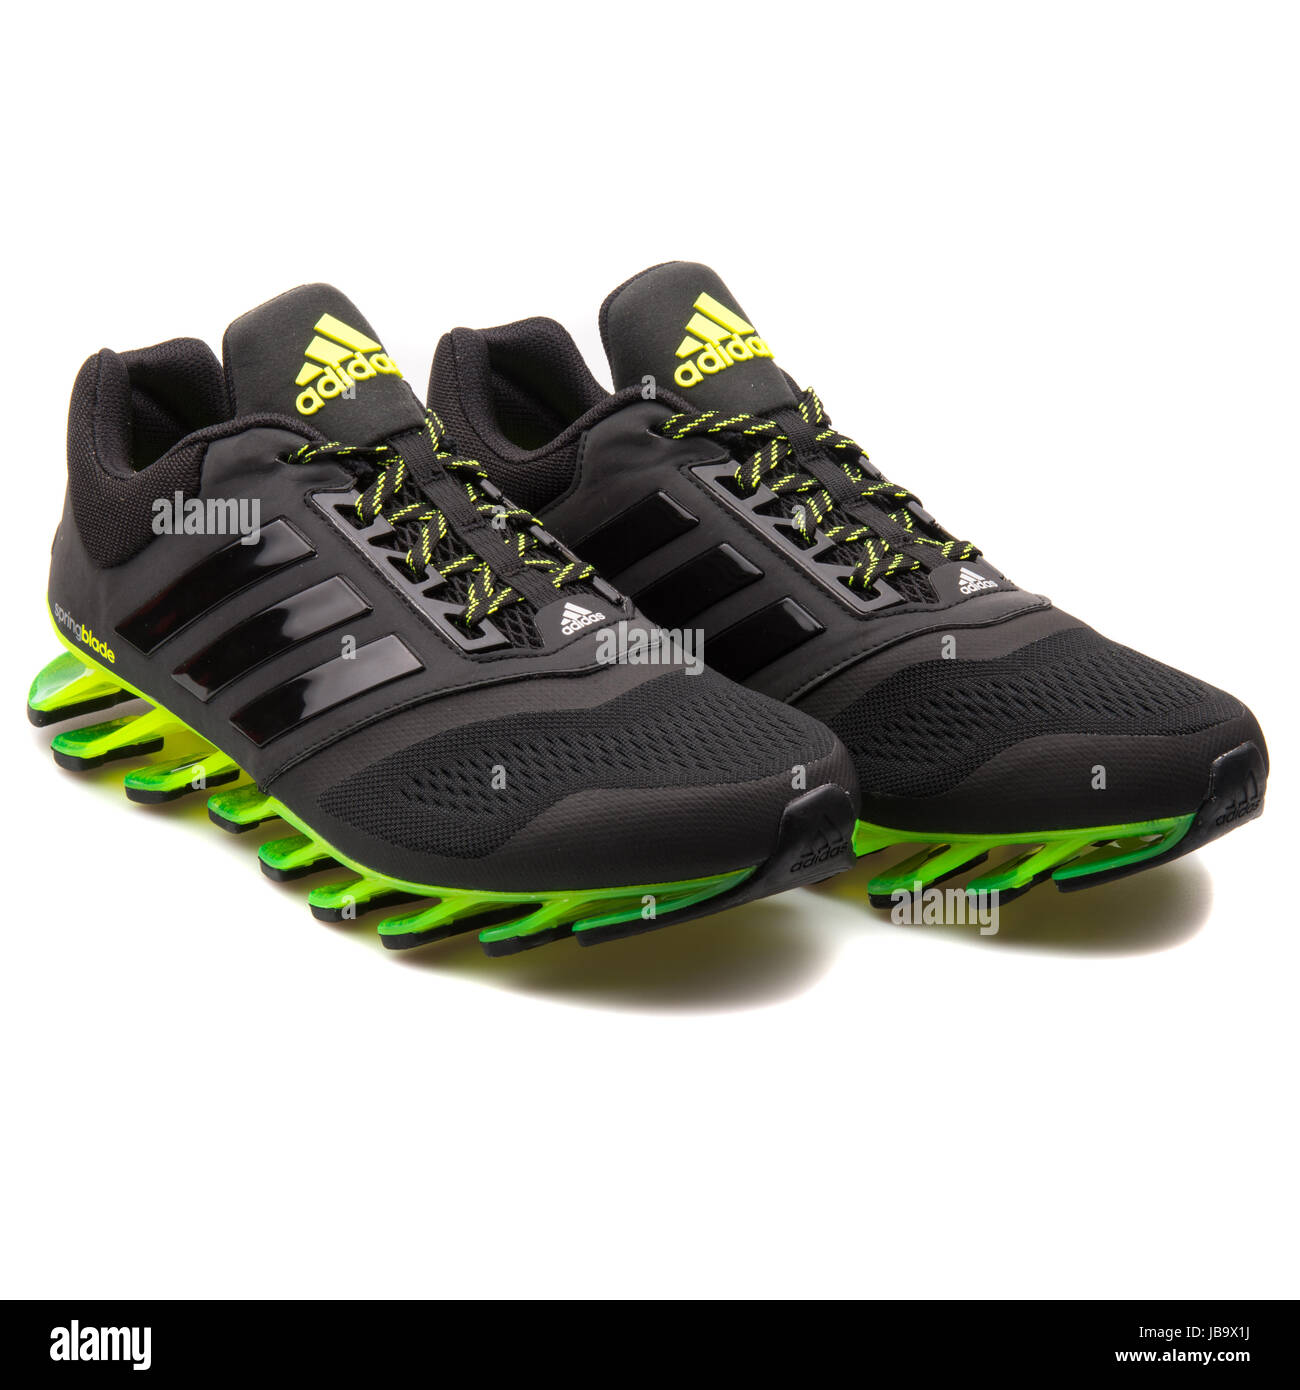 Adidas Springblade Drive 2 m Black and Green Men's Running Sneakers -  D69684 Stock Photo - Alamy